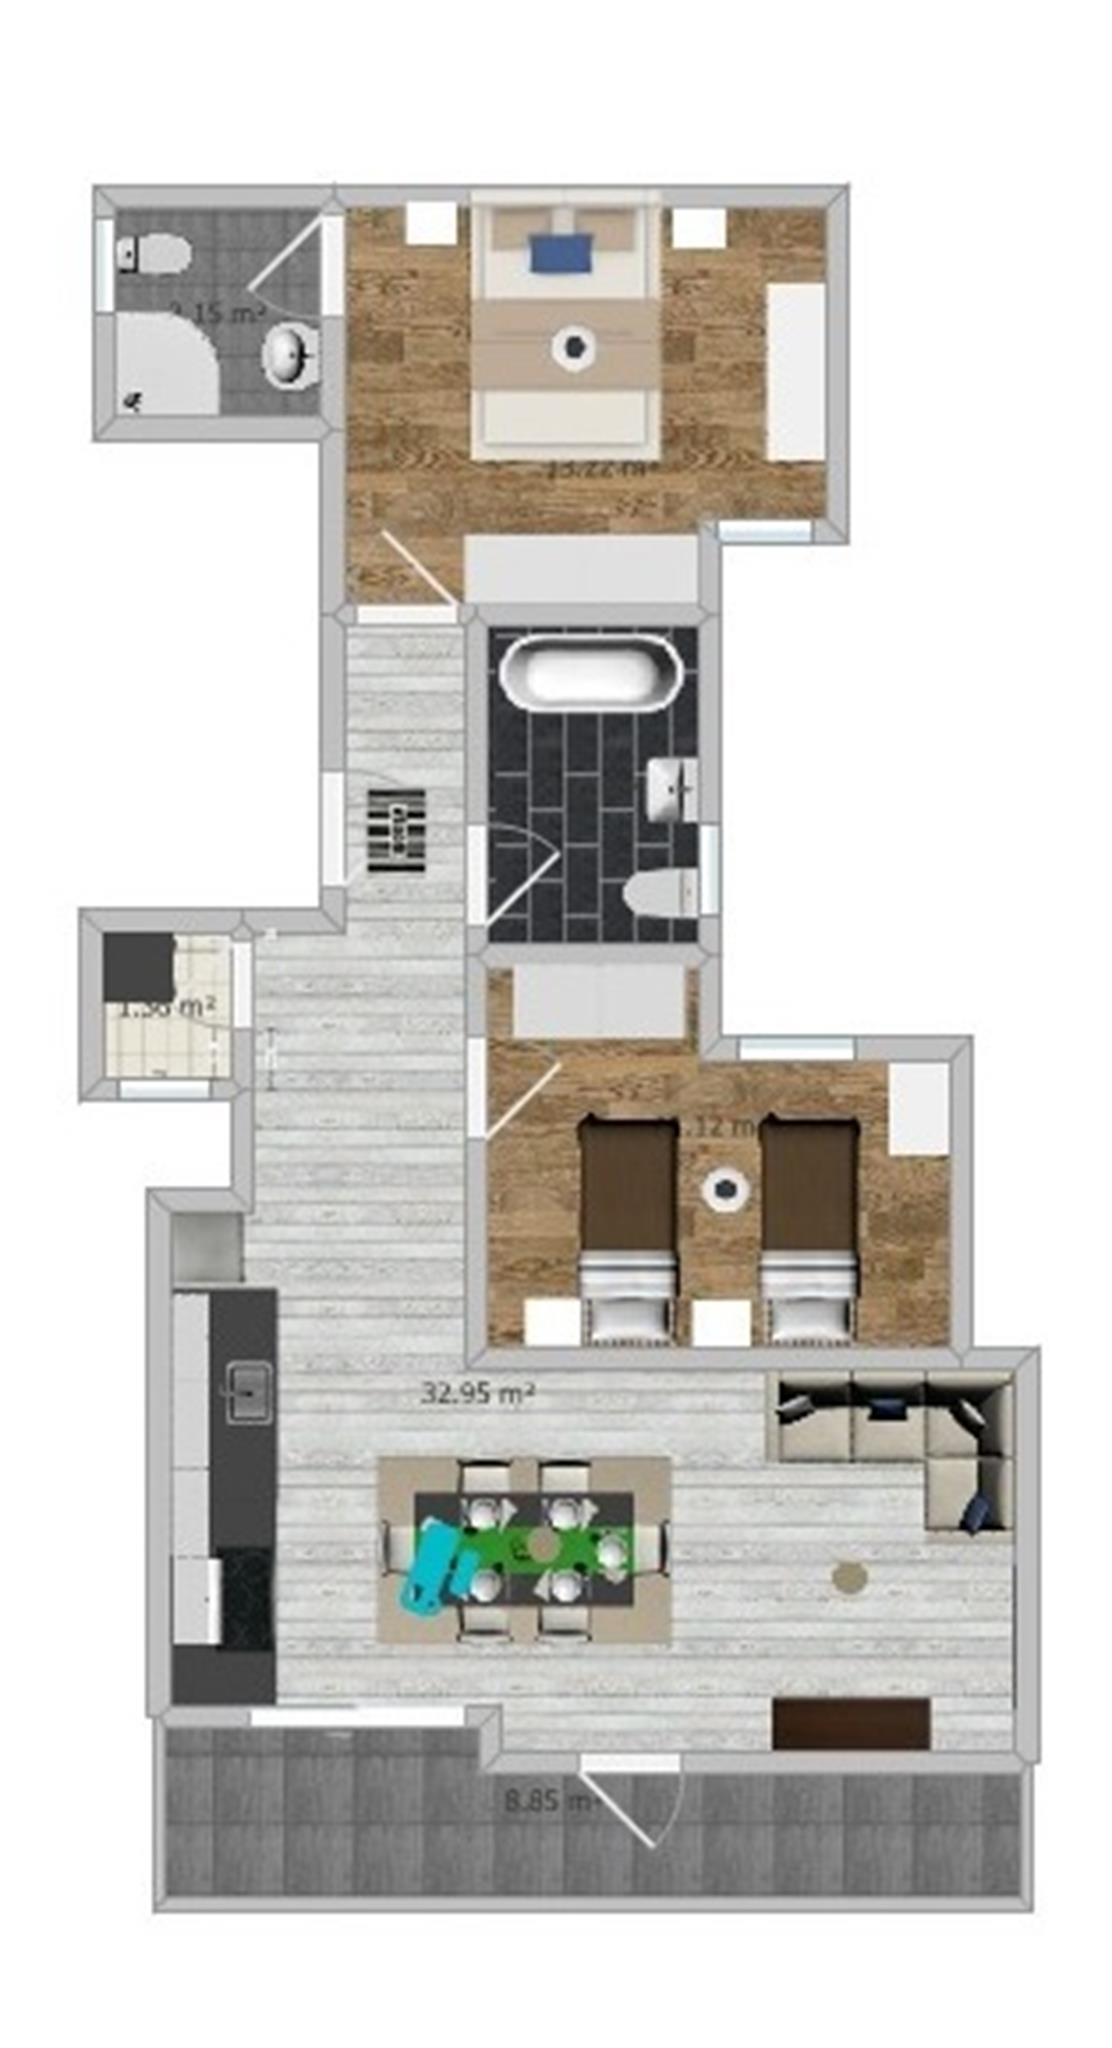 St Pauls Bay, Finished Apartment - Ref No 006813 - Image 1